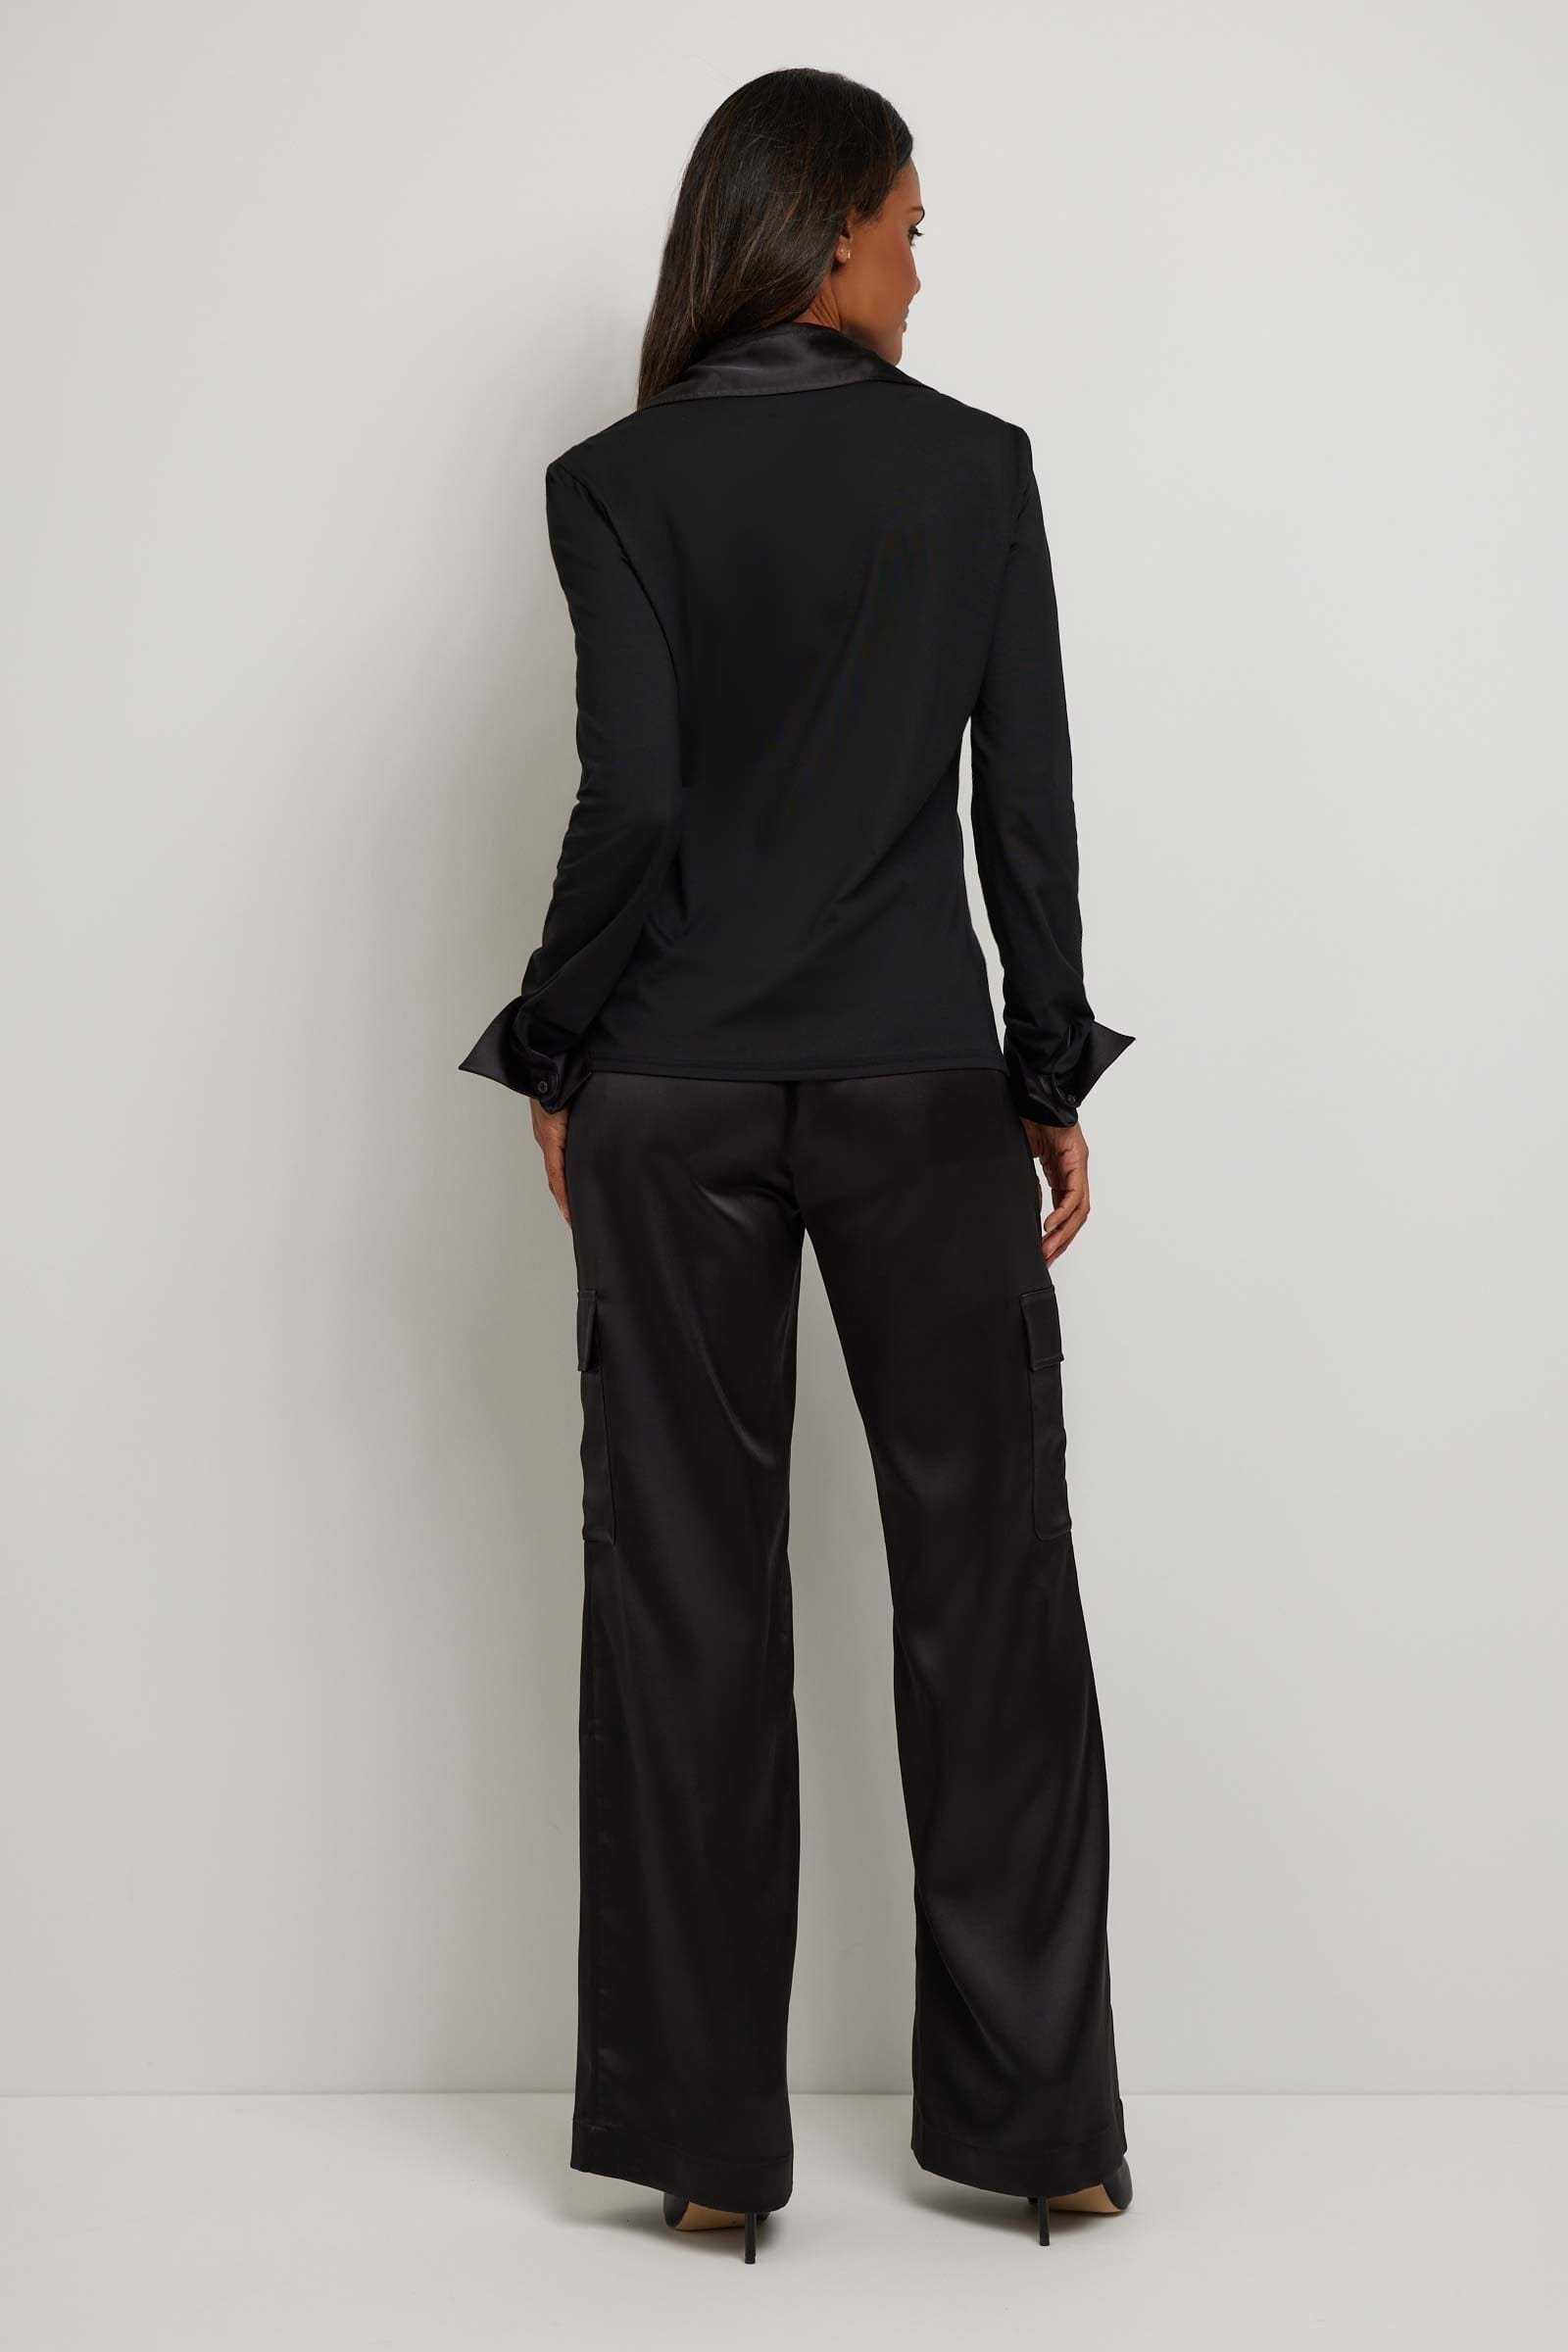 The Best Travel Top. Woman Showing the Back Profile of a Sadie Button Up Top in Black.